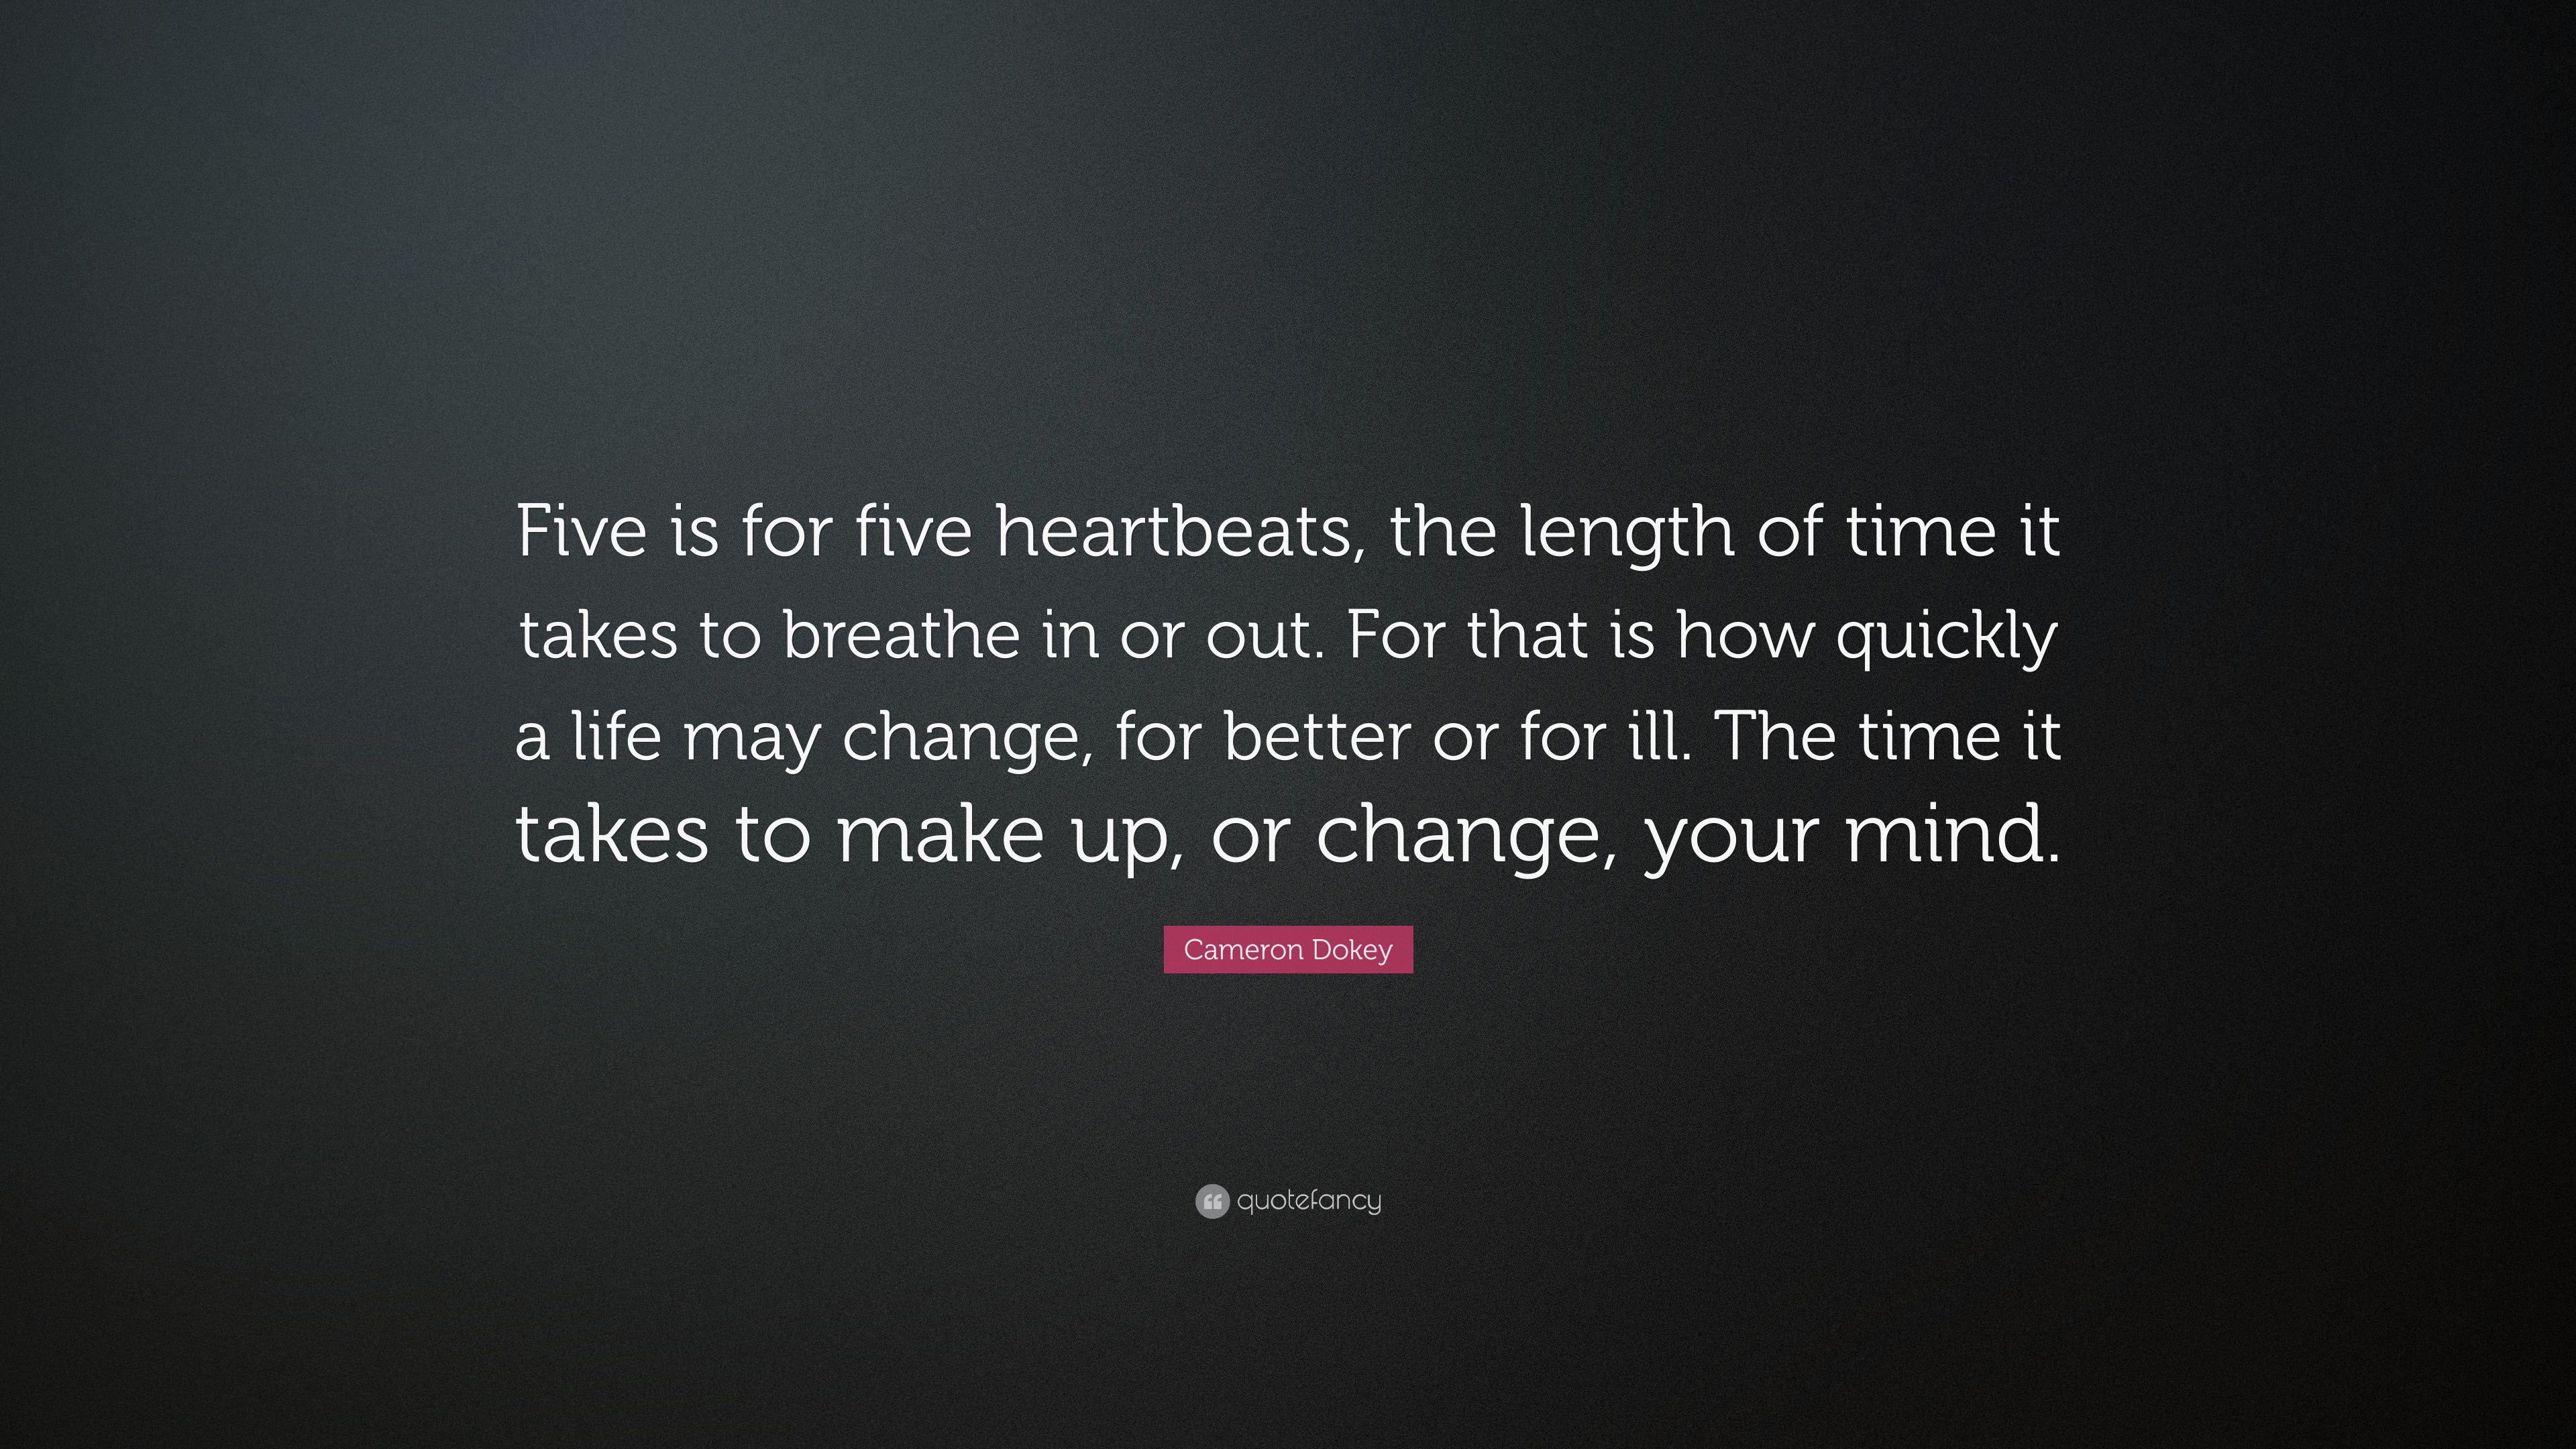 Cameron Dokey Quote: “Five is for five heartbeats